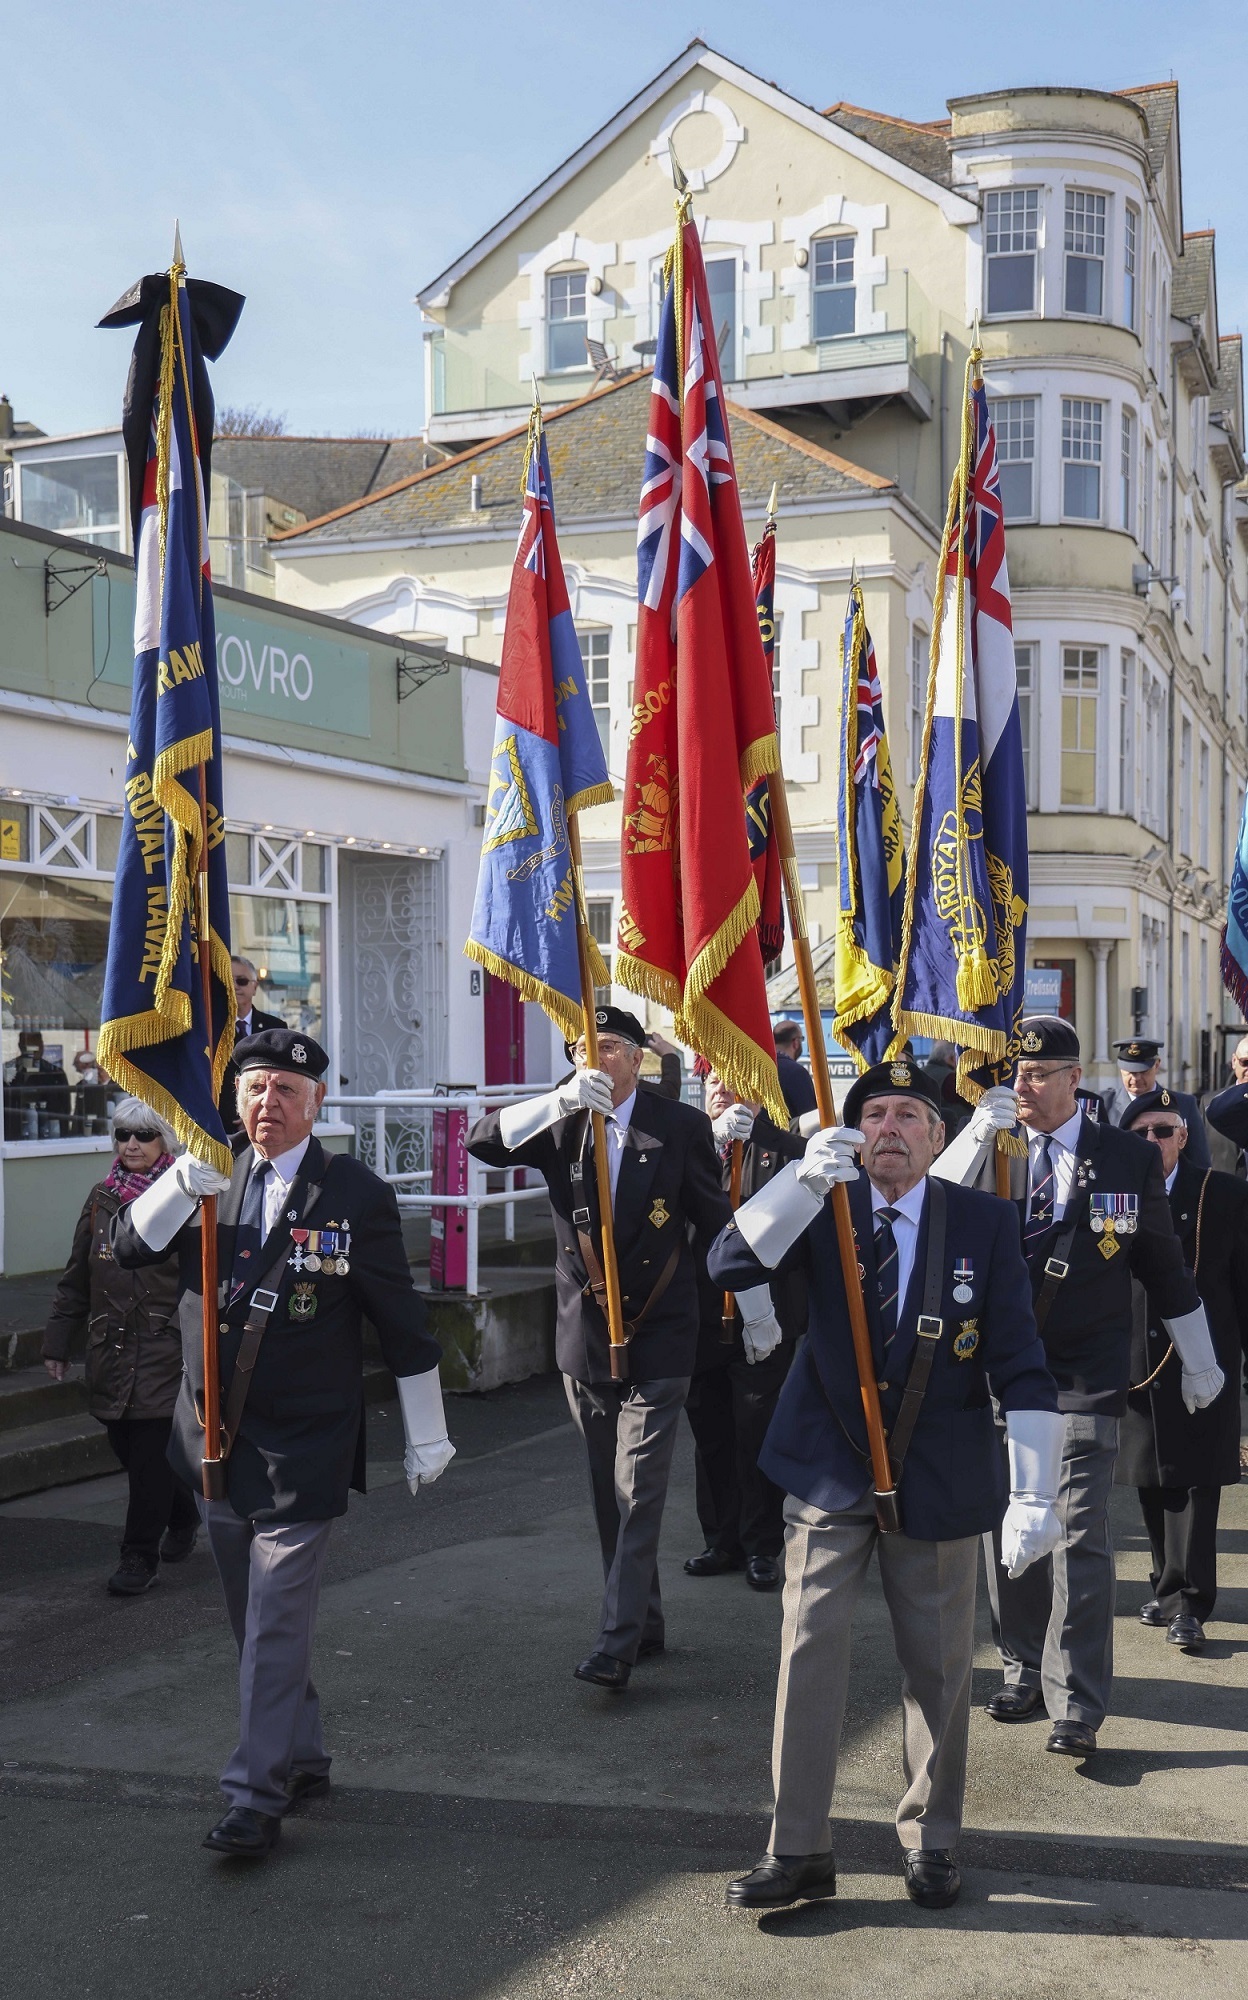 Pictured: Standard Bearers march through Falmouth town centre during the 80th memorial service marking the St Nazaire Raid. Credit: LPhot Dan Rosenbaum, RNAS Yeovilton